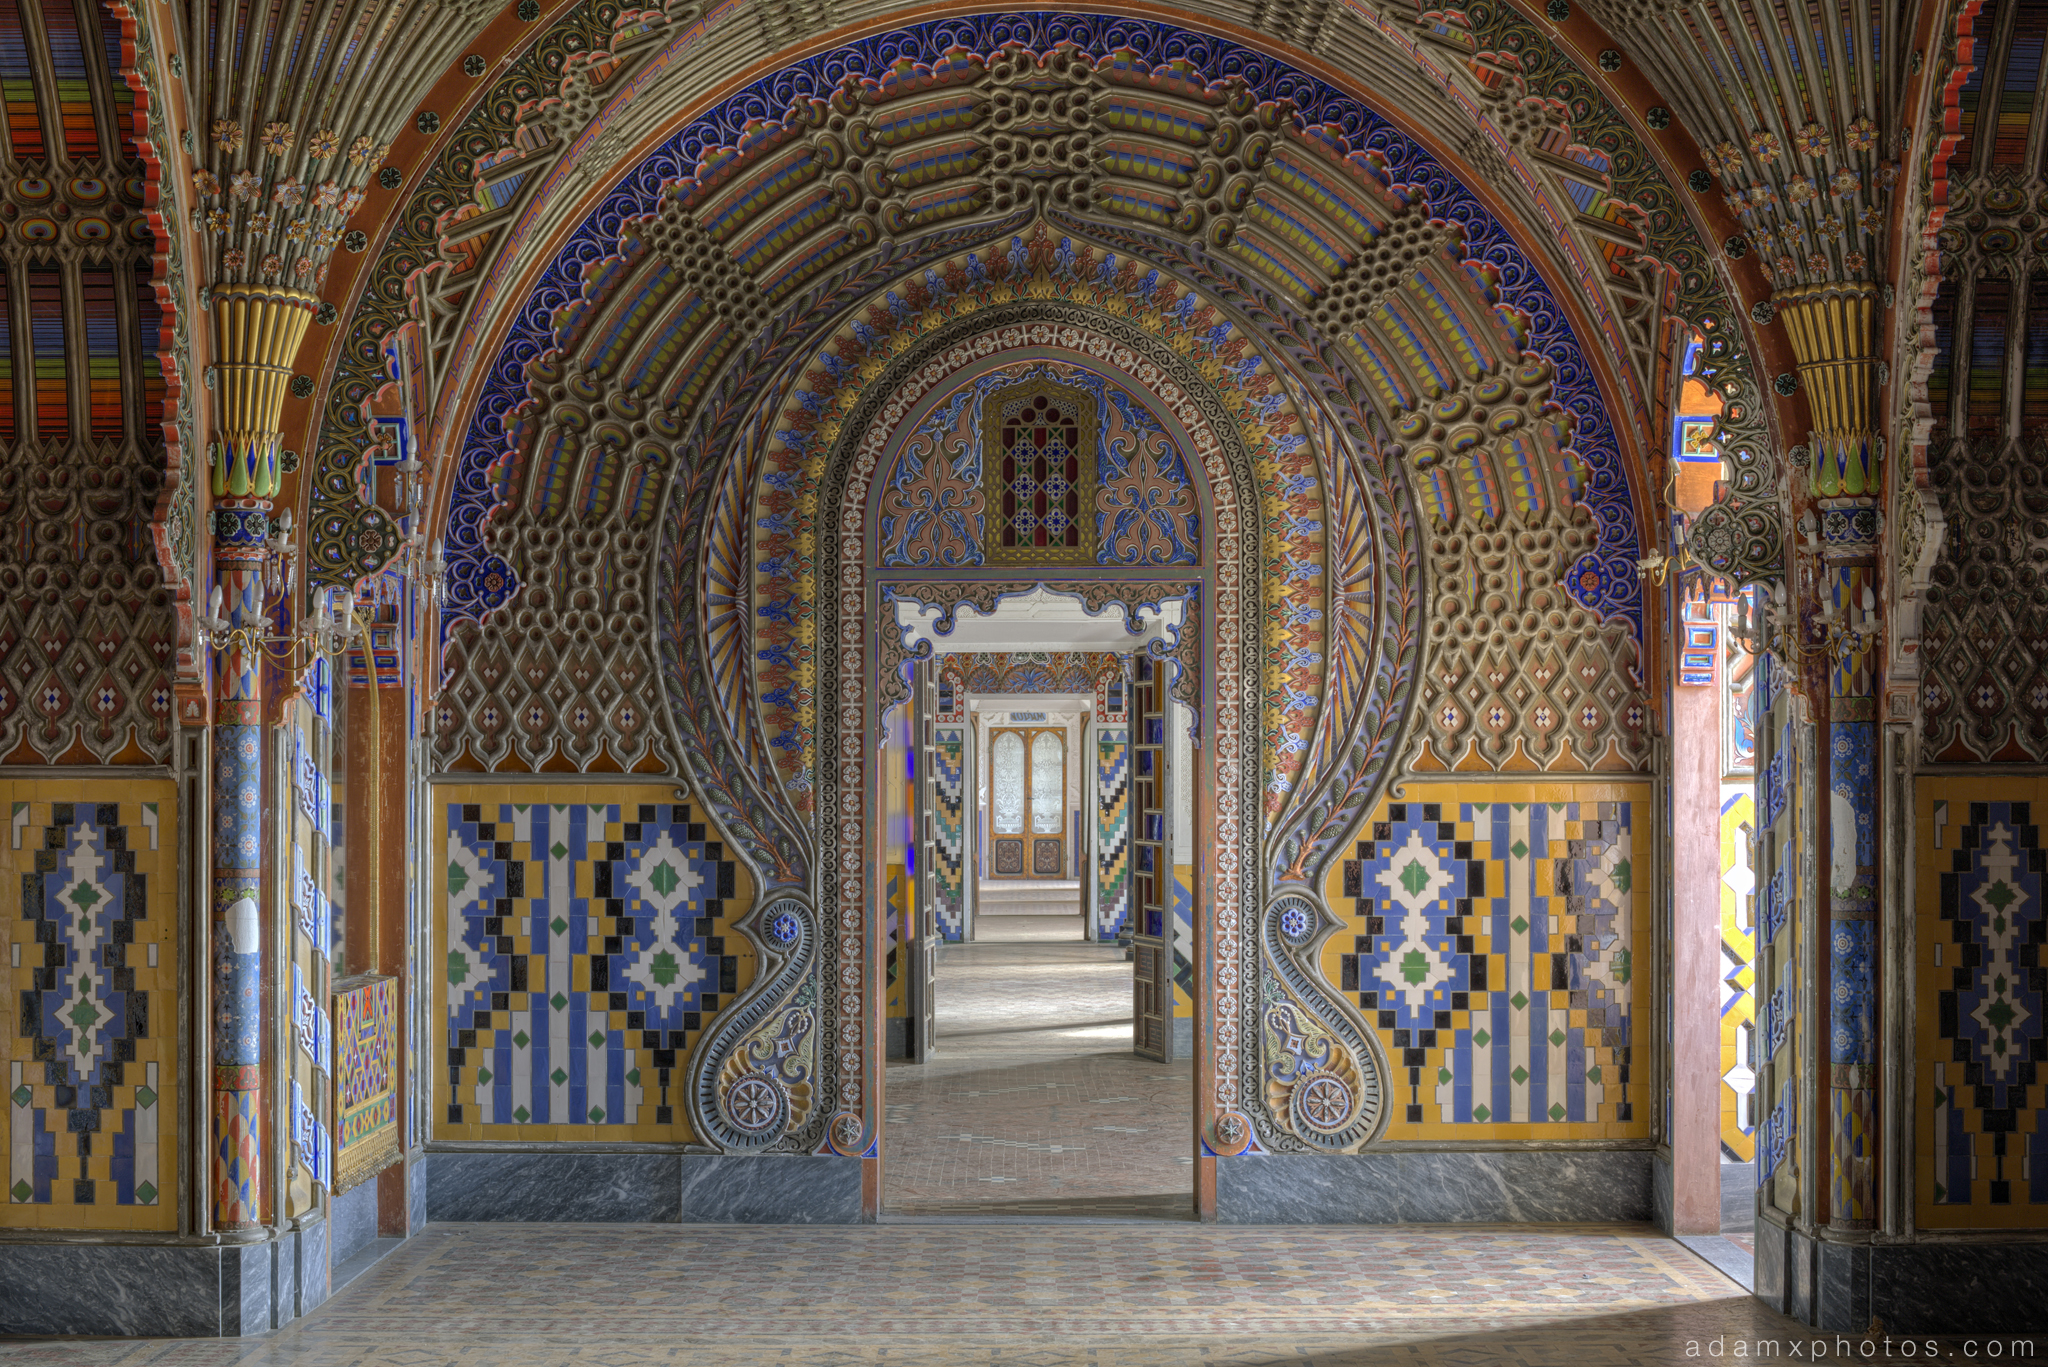 The Peacock Room colours fans tiles ornate intricate door ceiling Non Plus Ultra Fairytale Castle of Sammezzano Castello di Sammezzano Urbex Adam X Urban Exploration photo photos report decay detail UE abandoned Ornate Moorish tiling tiled derelict unused empty disused decay decayed decaying grimy grime